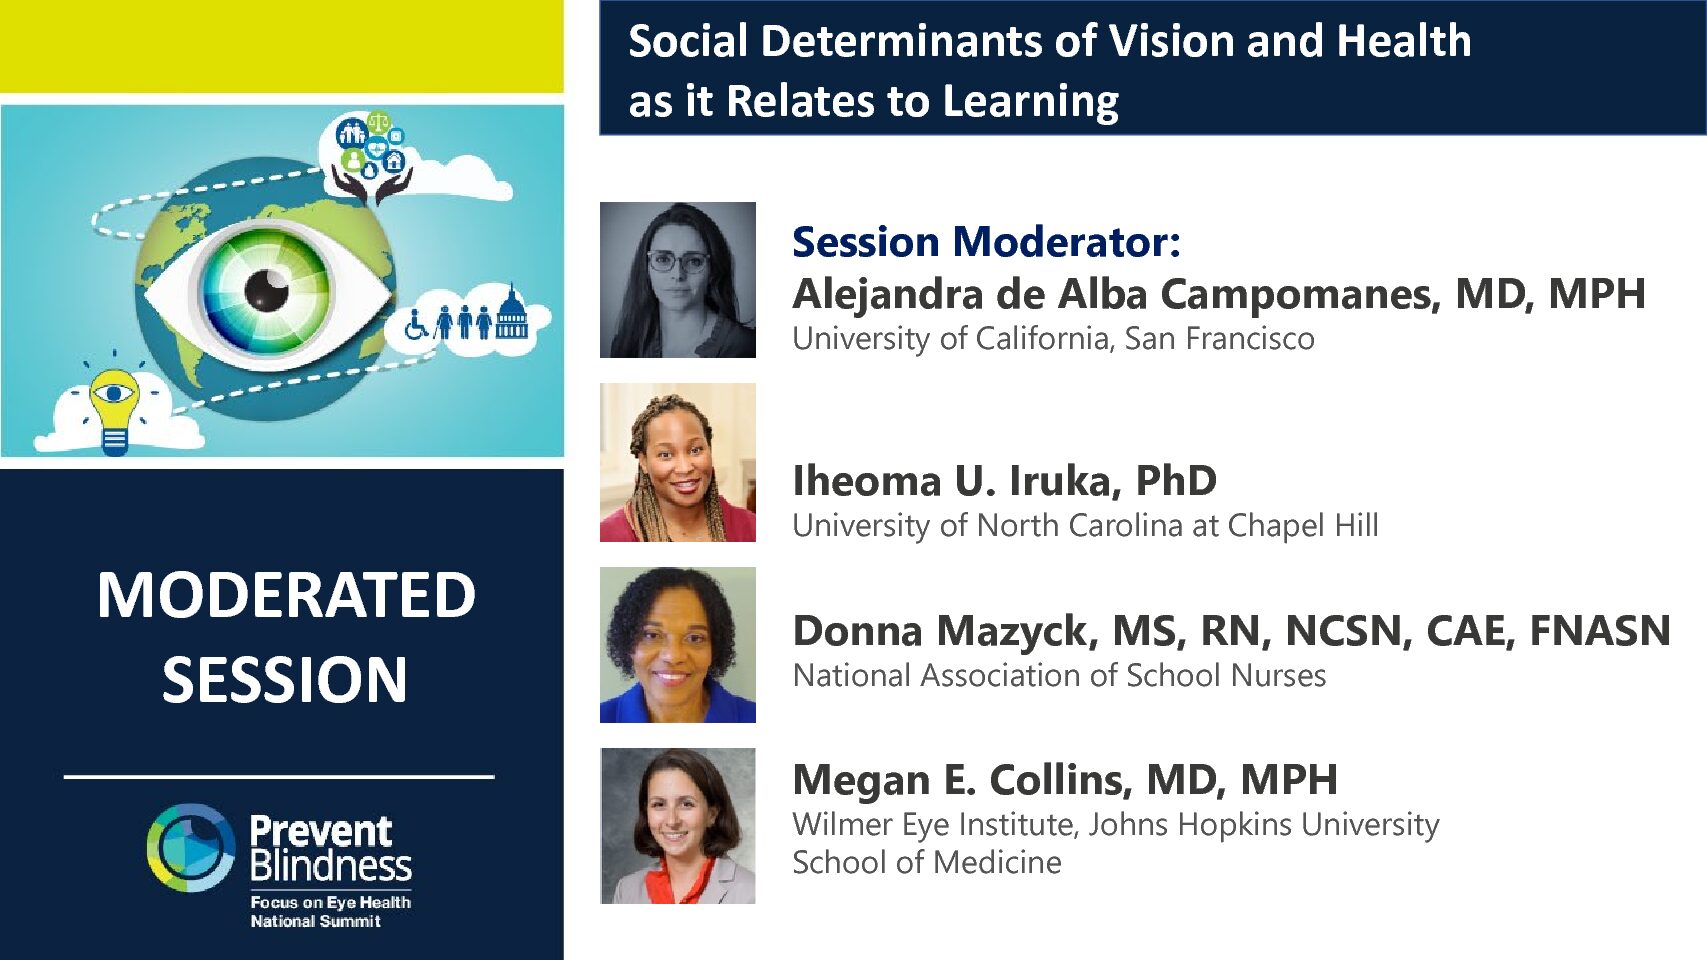 Social Determinants of Vision and Health as it Relates to Learning